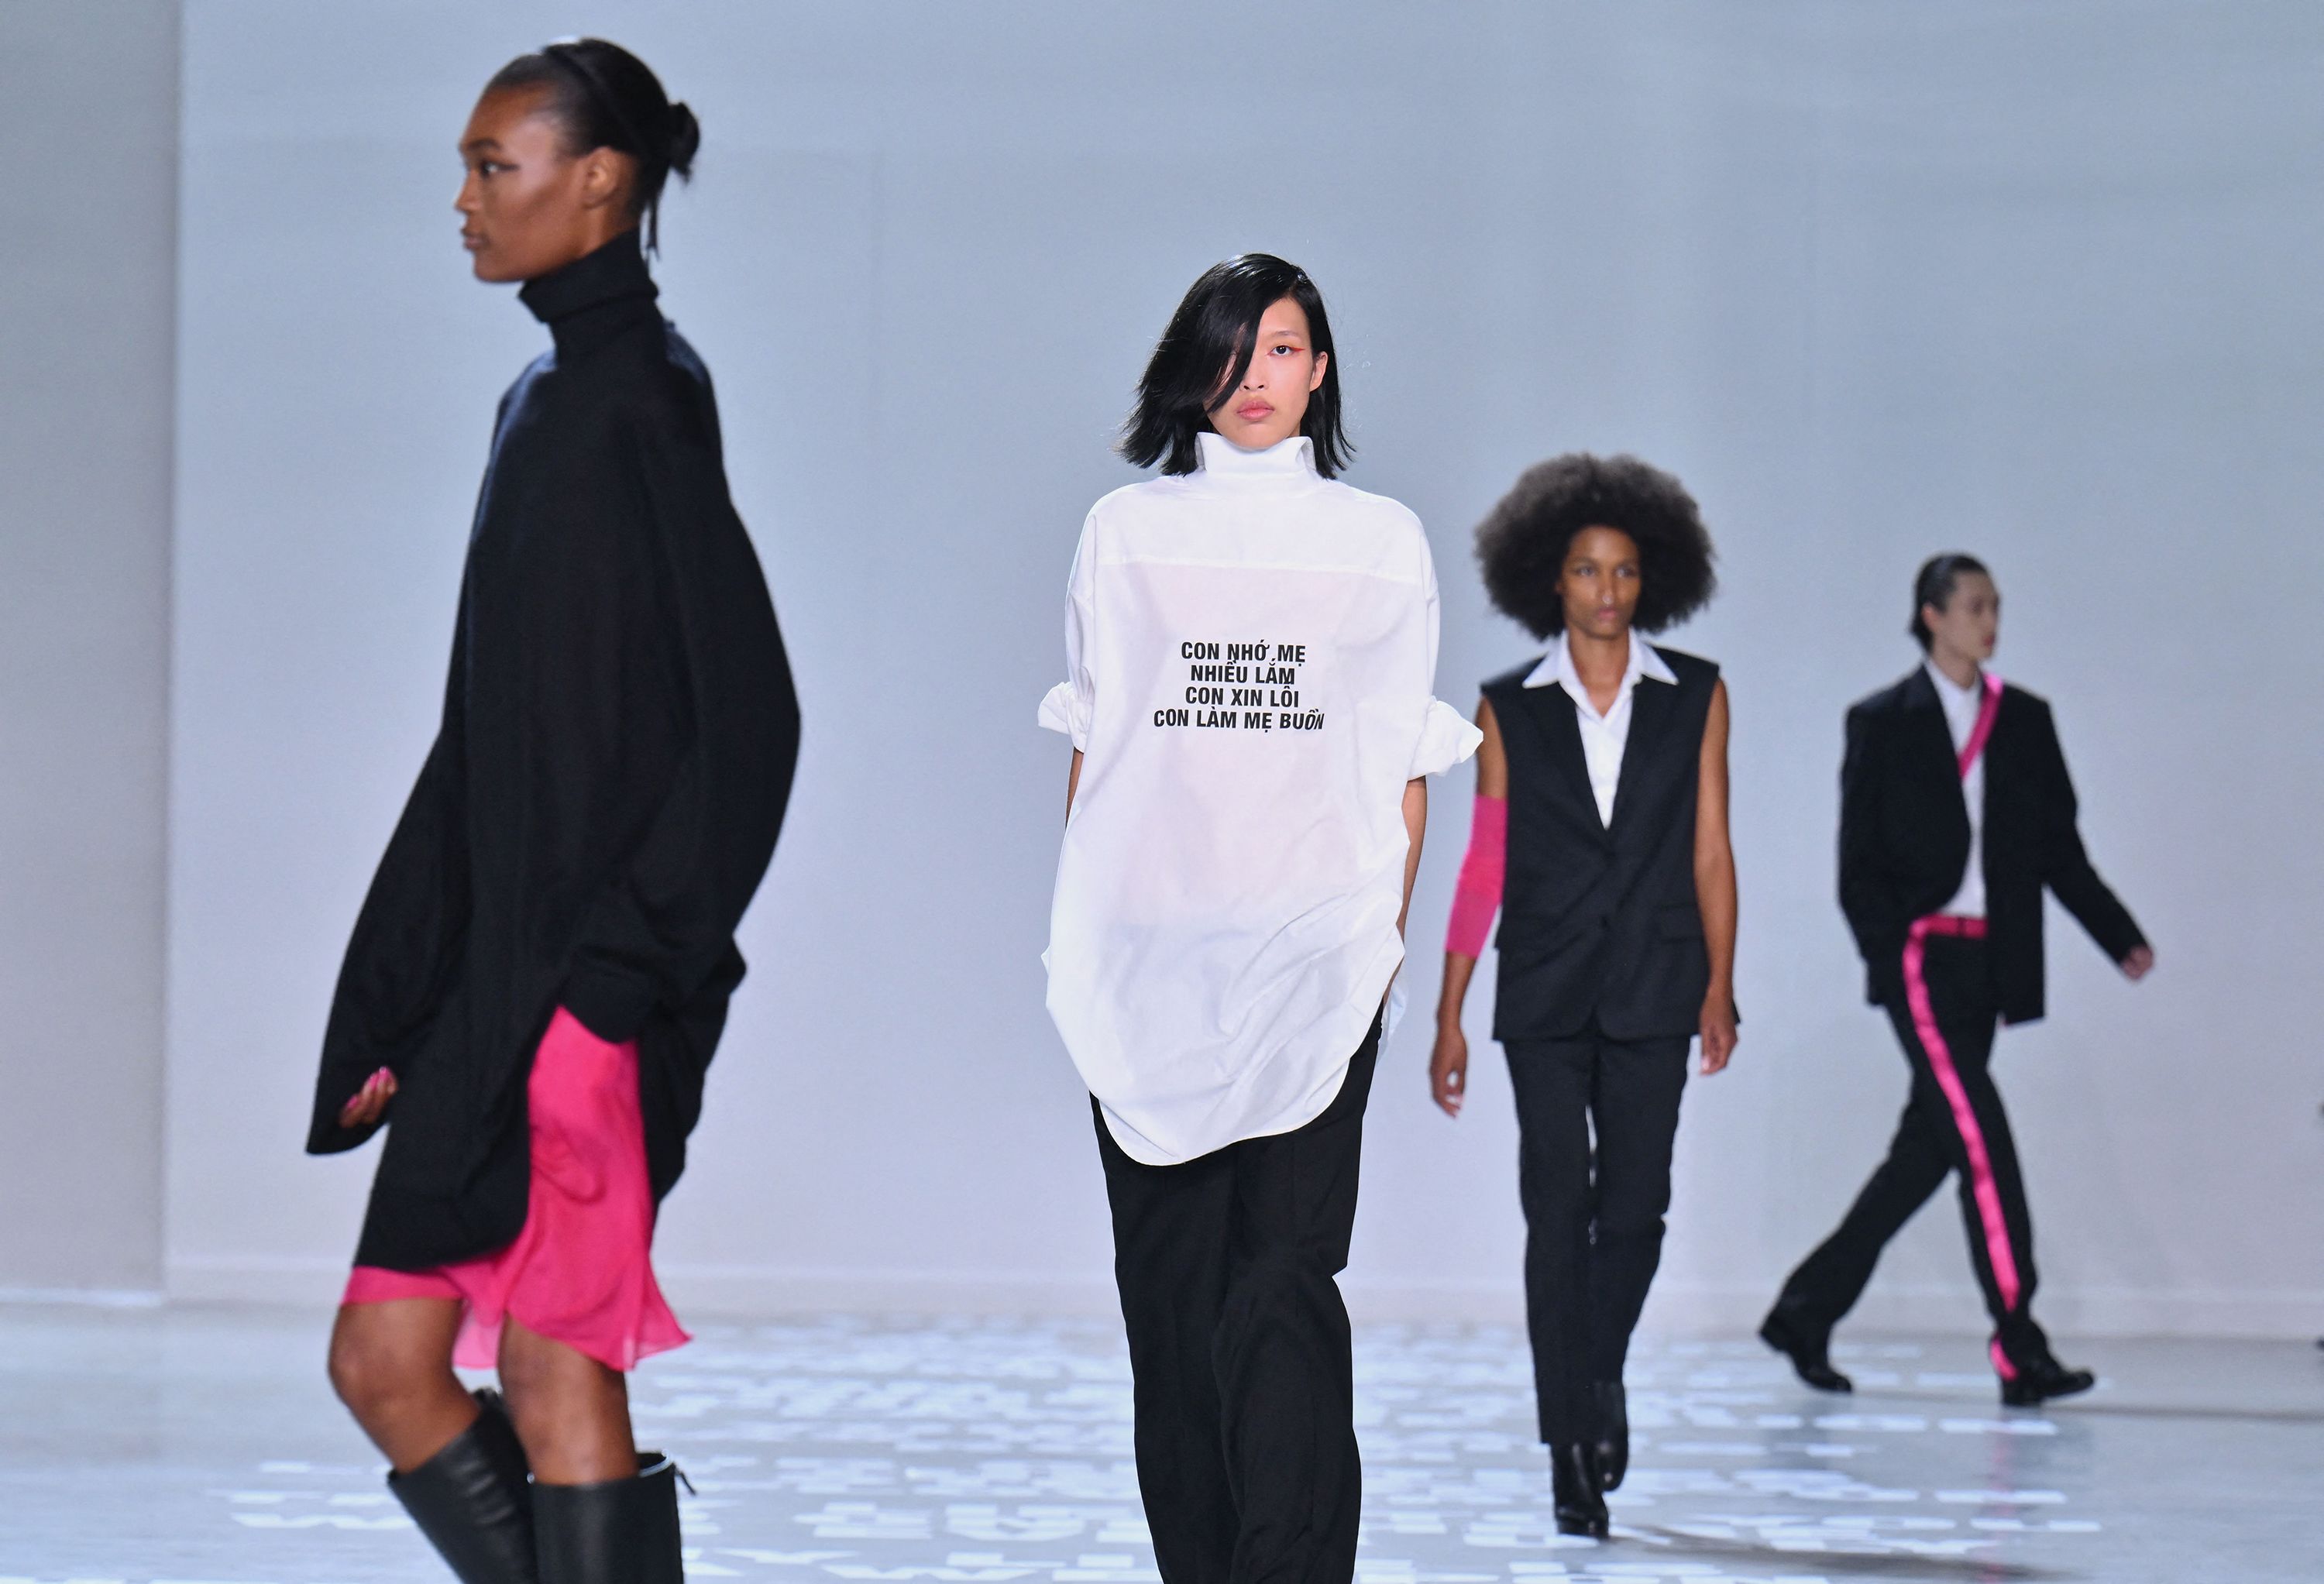 Helmut Lang News, Collections, Fashion Shows, Fashion Week Reviews